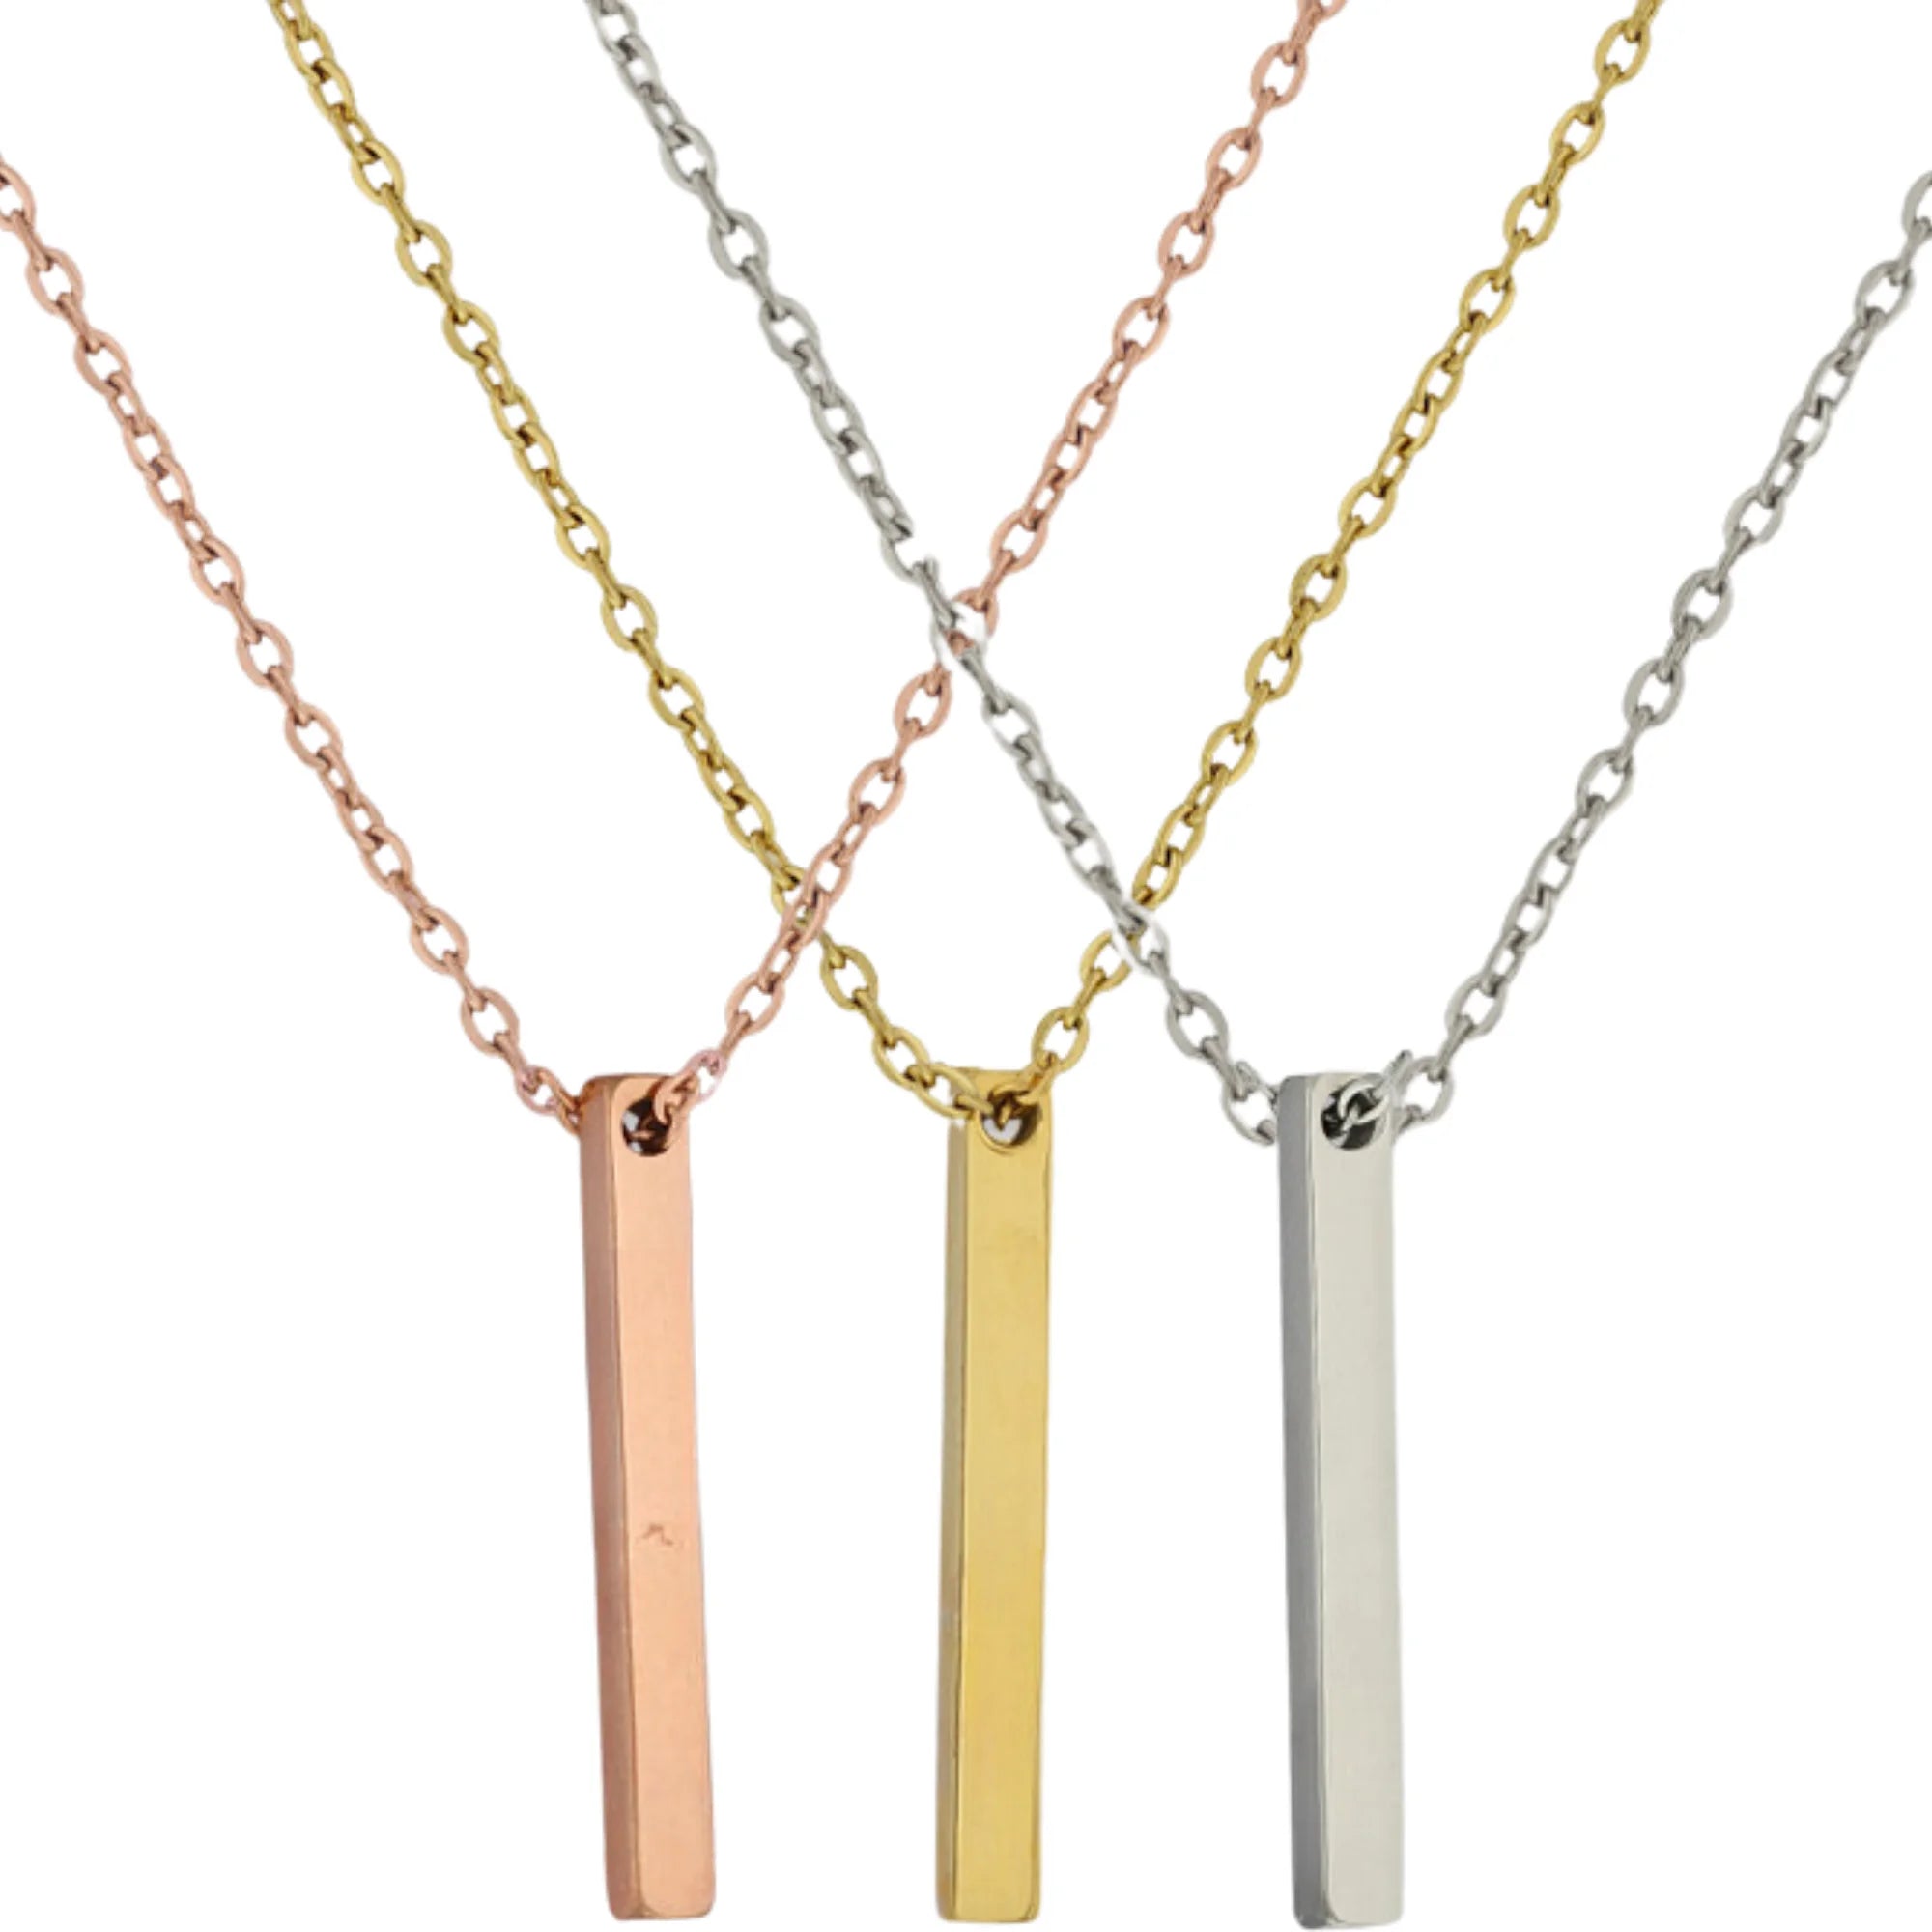 3D Bar Necklace,4 side necklace,Date Necklace,Minimalist Necklace,Necklace for women,Signature Necklace,coordinate necklace,custom name necklace,engraved necklace,gift for boyfriend,gift for men,gold bar necklace,his and hers gifts